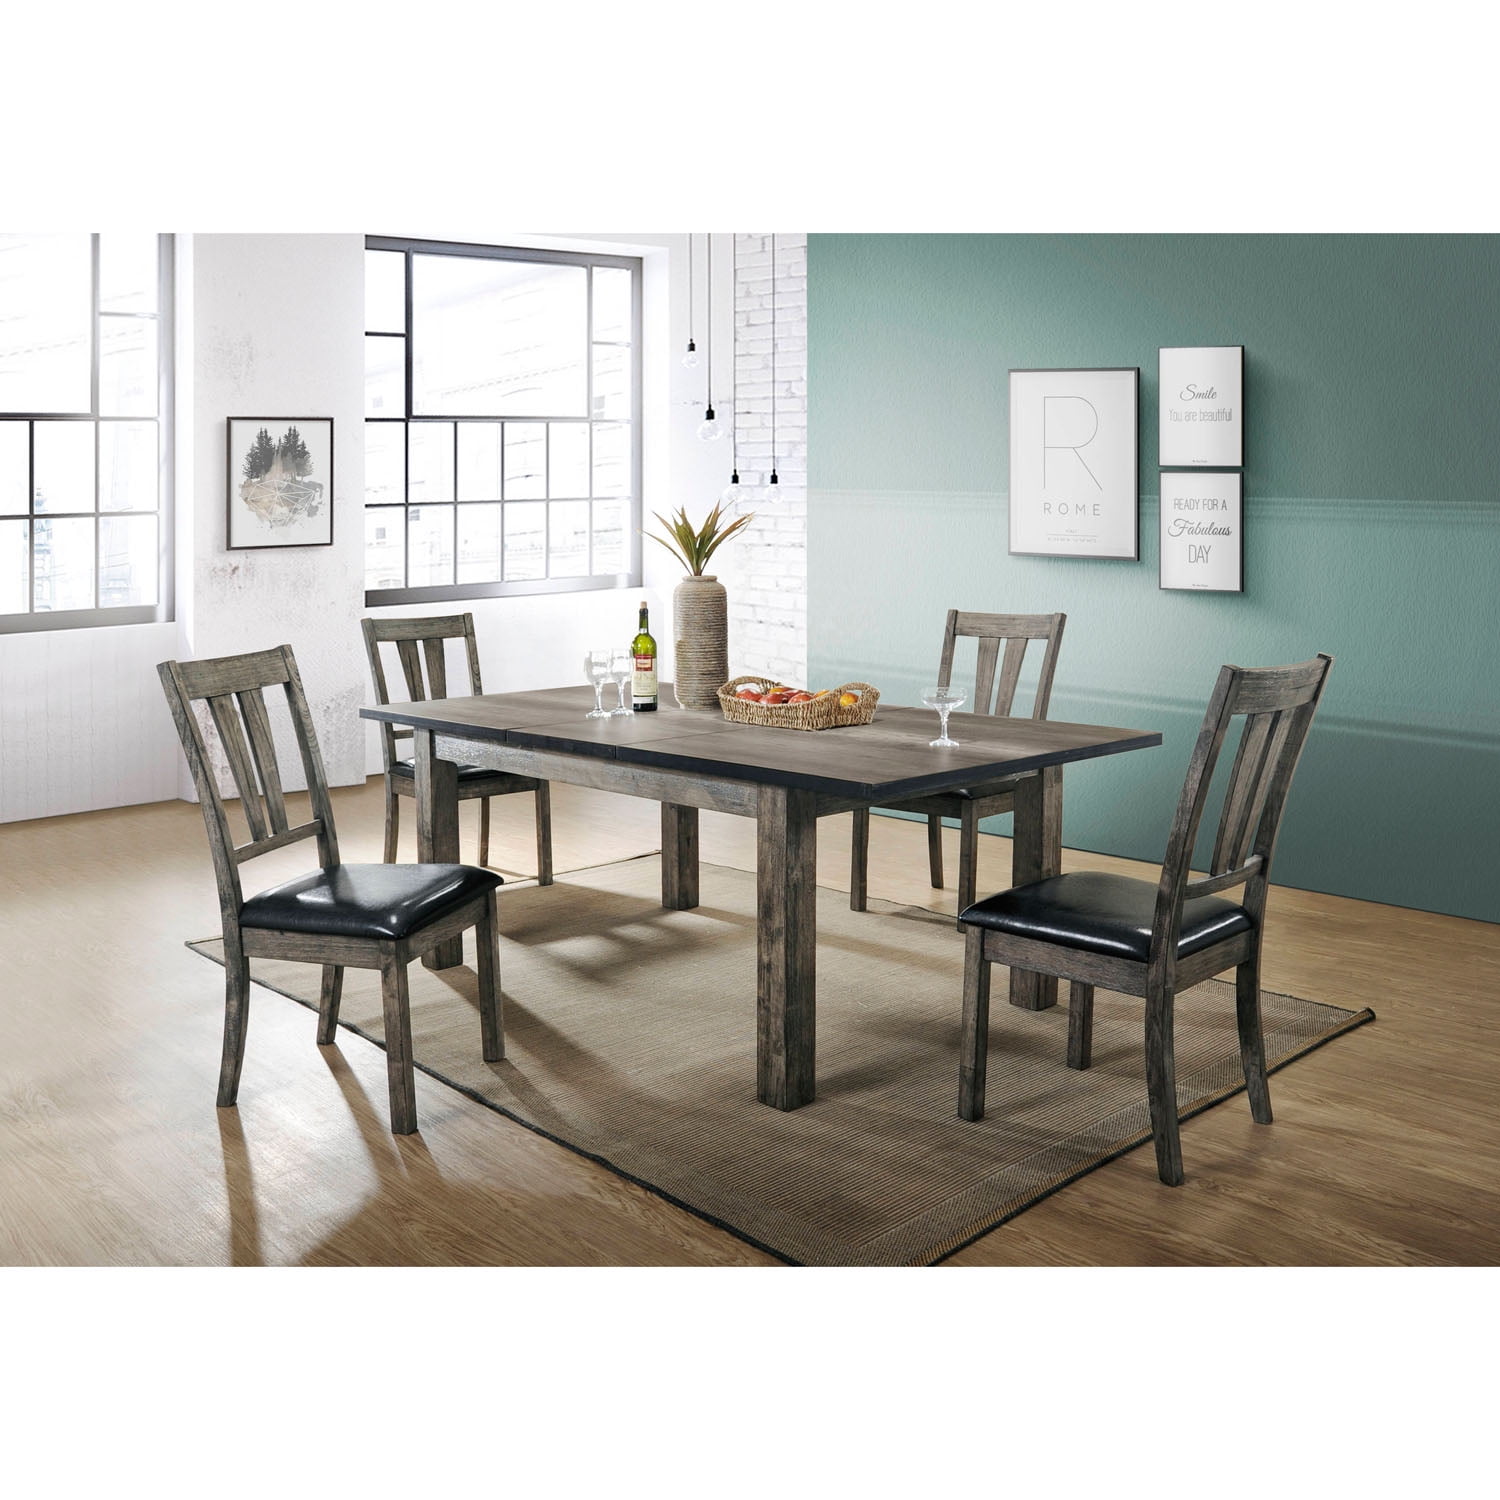 99001-pu5pc1-wg 30 X 78 X 42 In. Drexel Dining Table With 4 Pu Side Chairs, 5 Piece